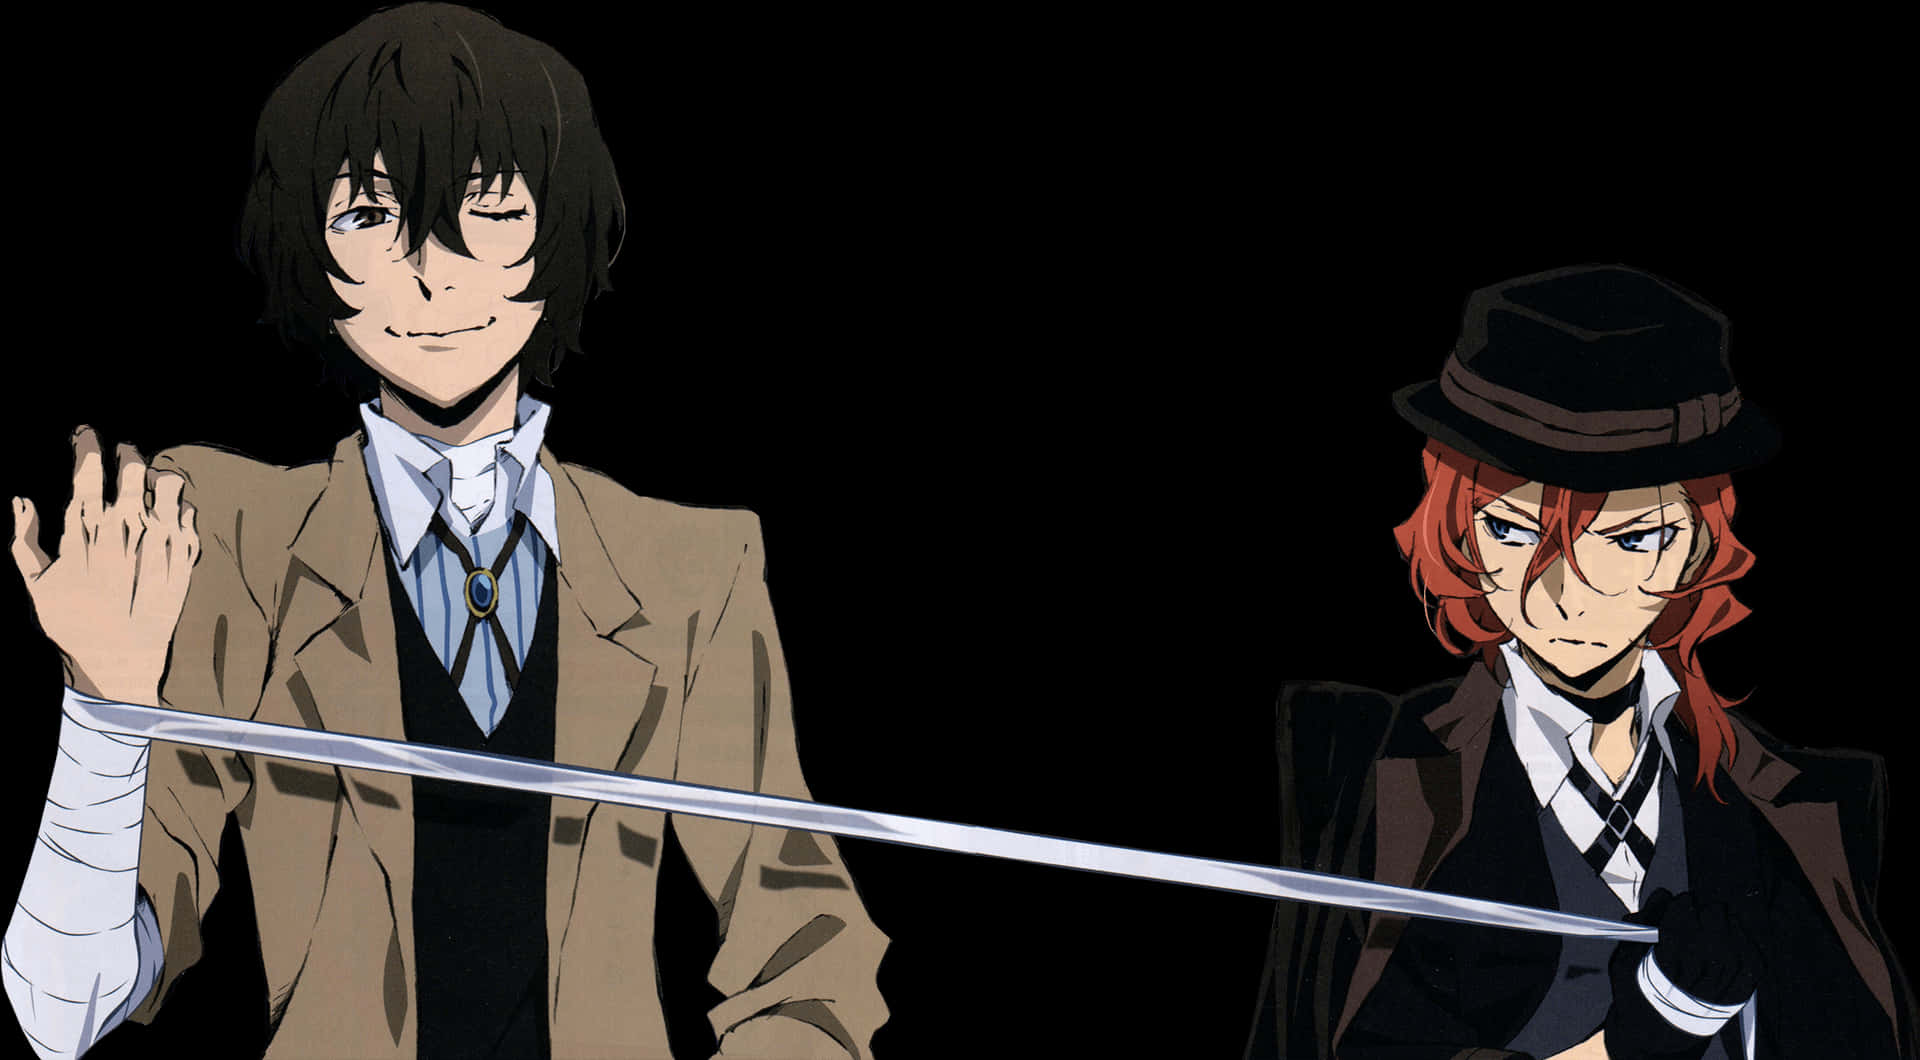 Uncover the mystery that is Bungou Stray Dogs! Wallpaper